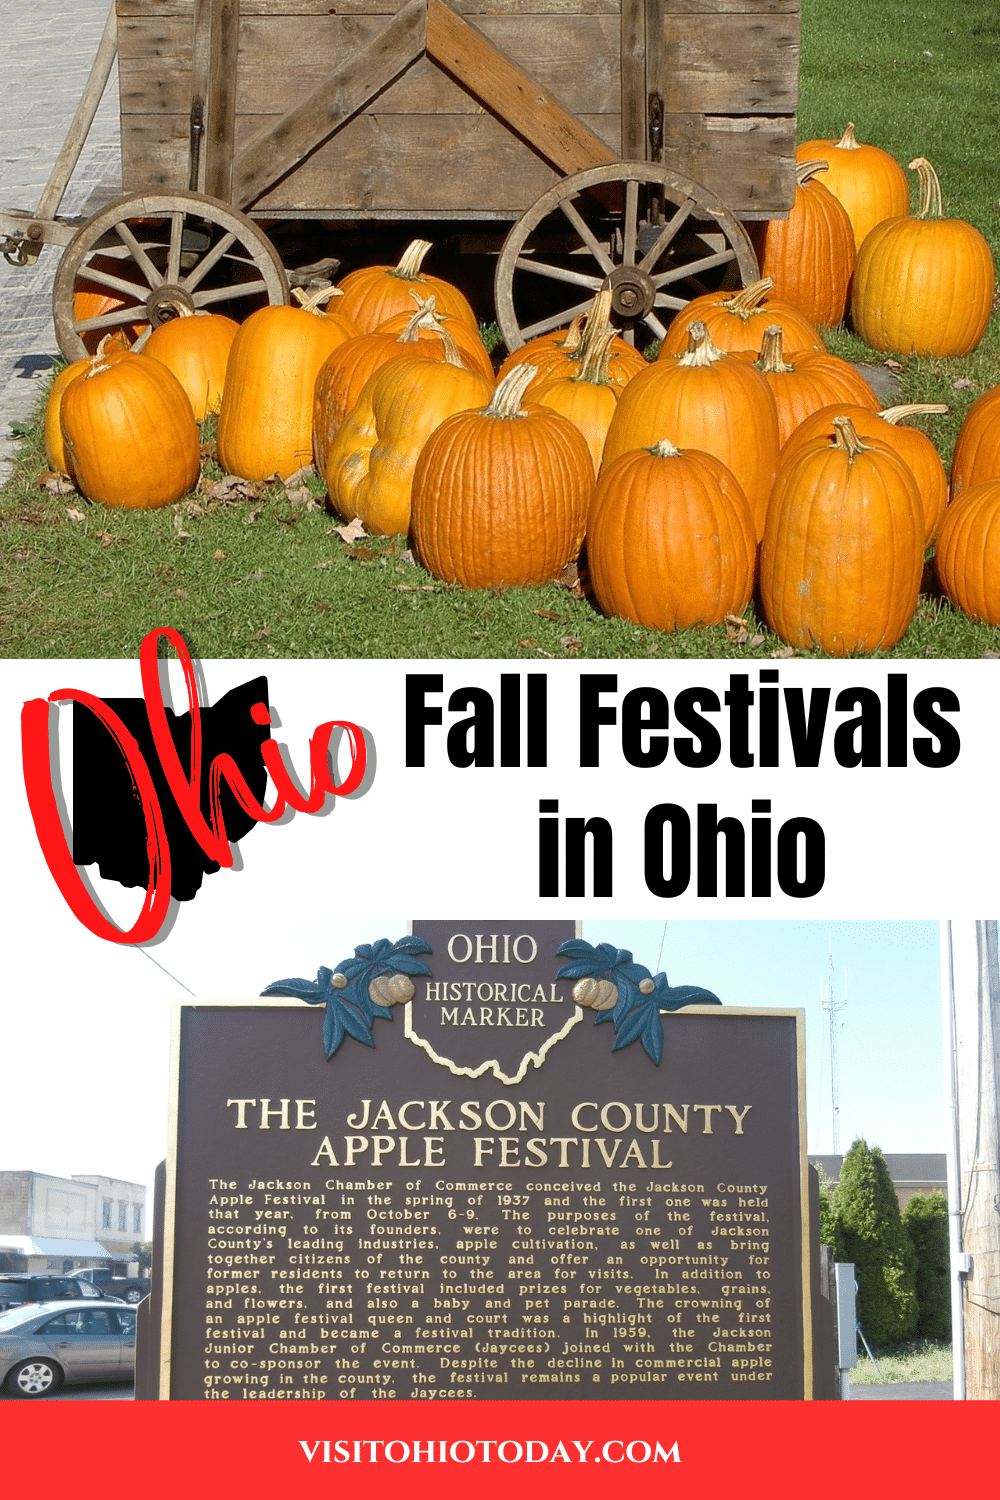 Ohio is the perfect place to check out and enjoy some wonderful fall festivals. Fall is the season for festivals, with Halloween, pumpkins and corn mazes all happening in this season. Here we focus on 10 of the best festivals you can visit in Ohio.